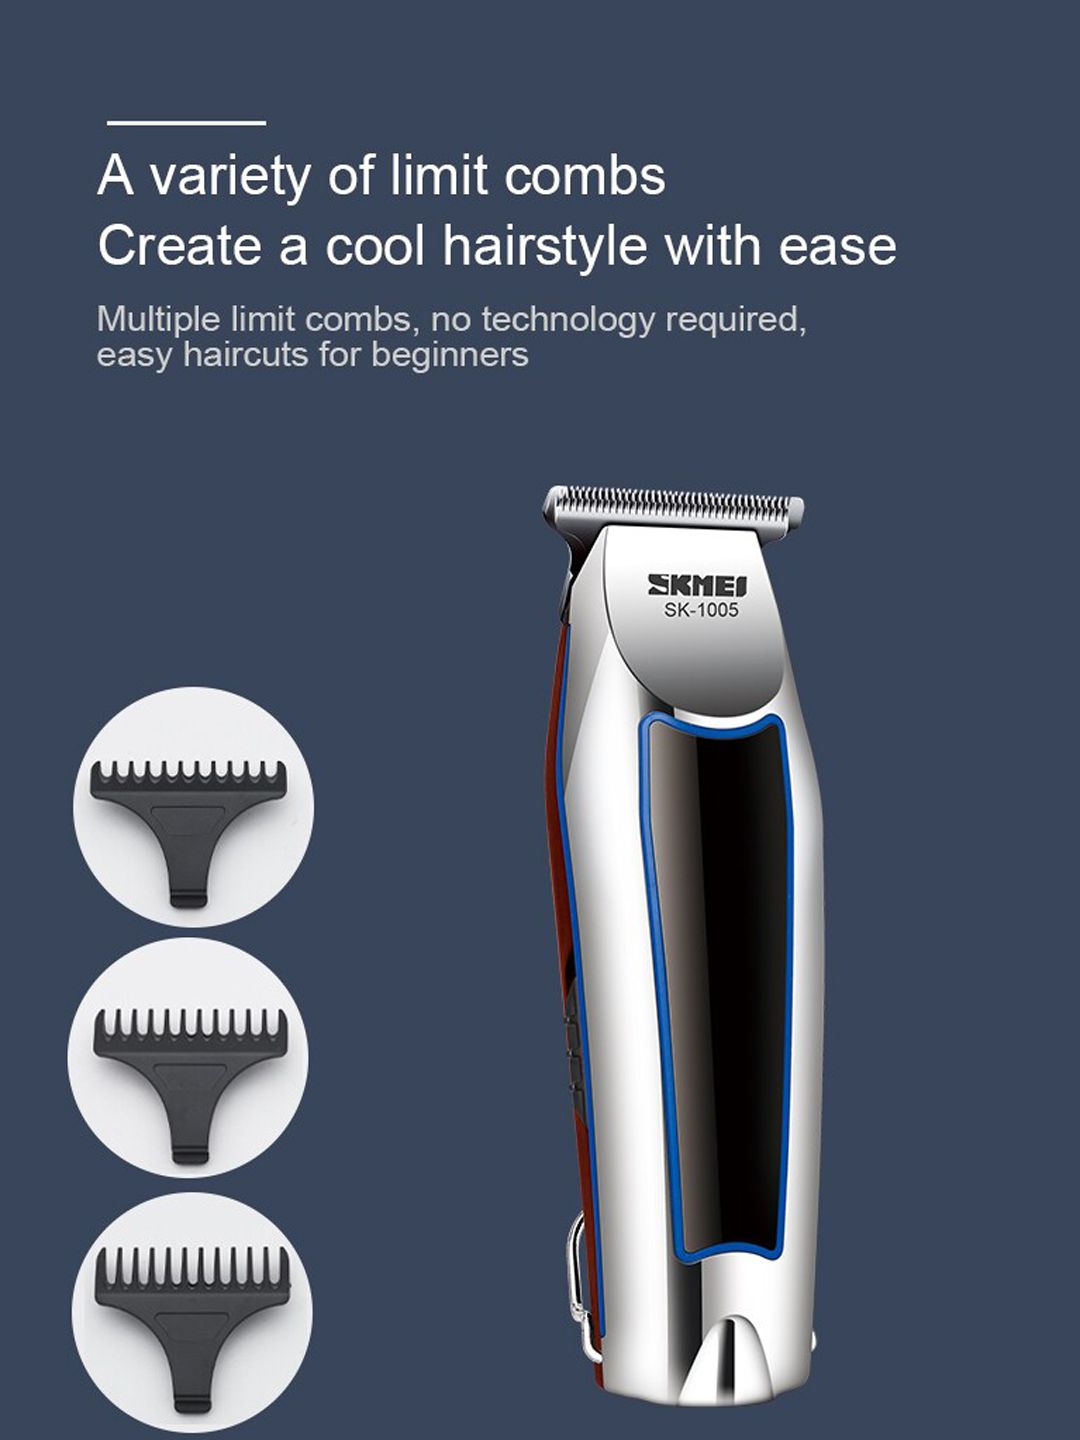 Skmei Professional Barber Combo Features Trimmer 1005 Price in India